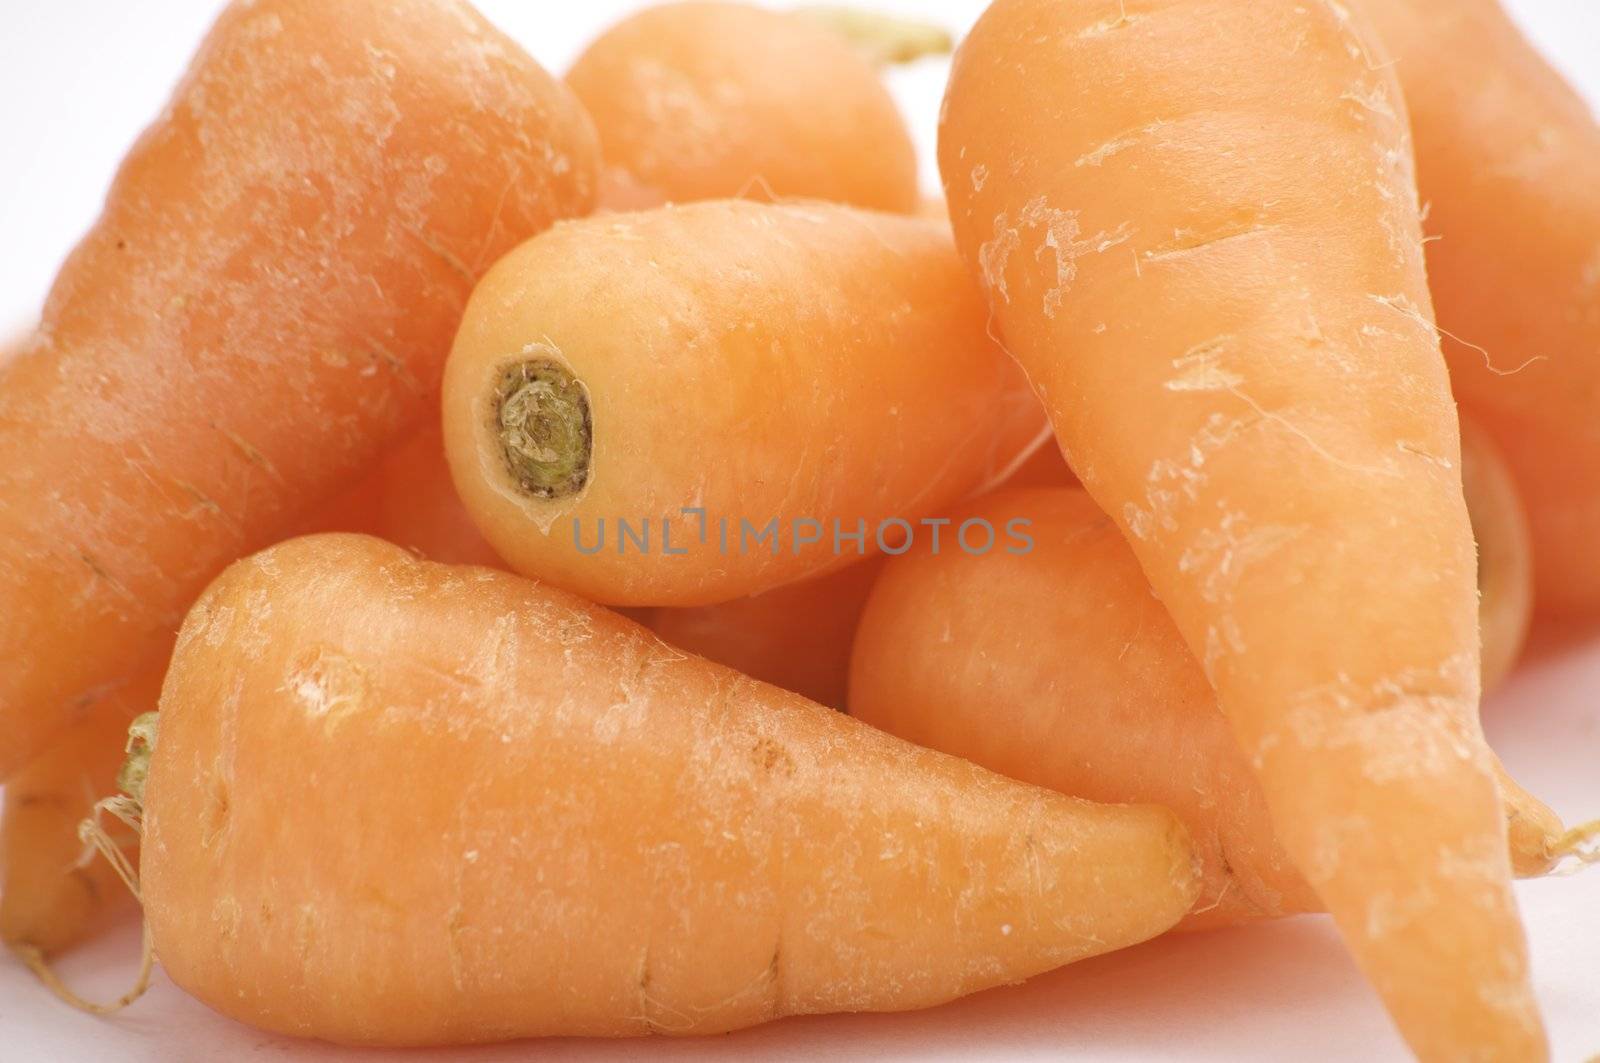 Fresh baby Carrots, isolated on a white background table, lit with a large light source from the above right.